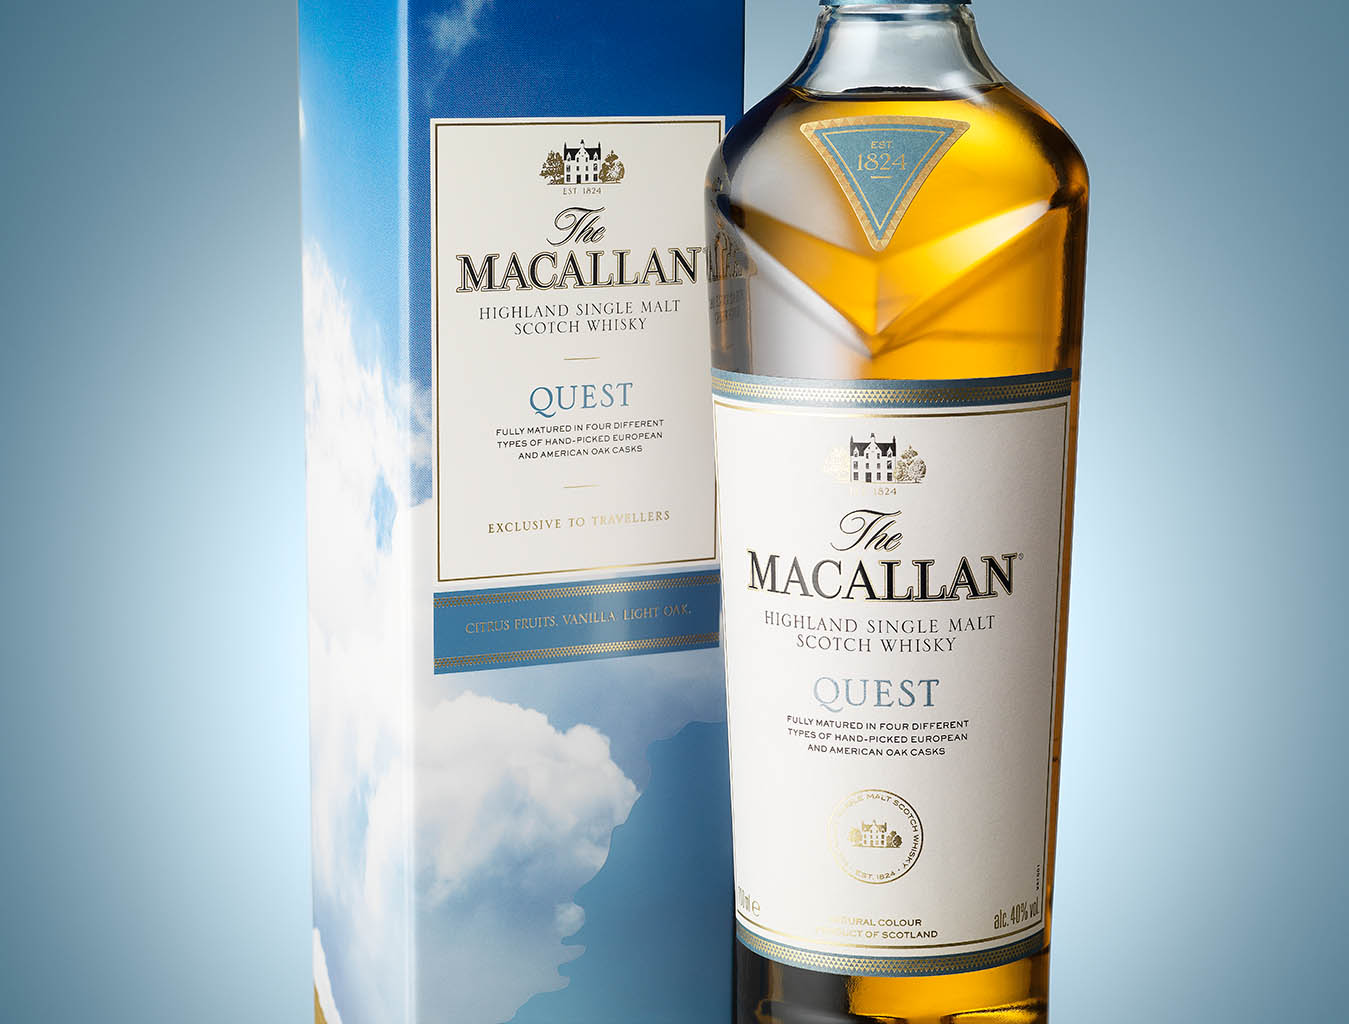 Packshot Factory - Coloured background - Macallan whisky bottle and box set